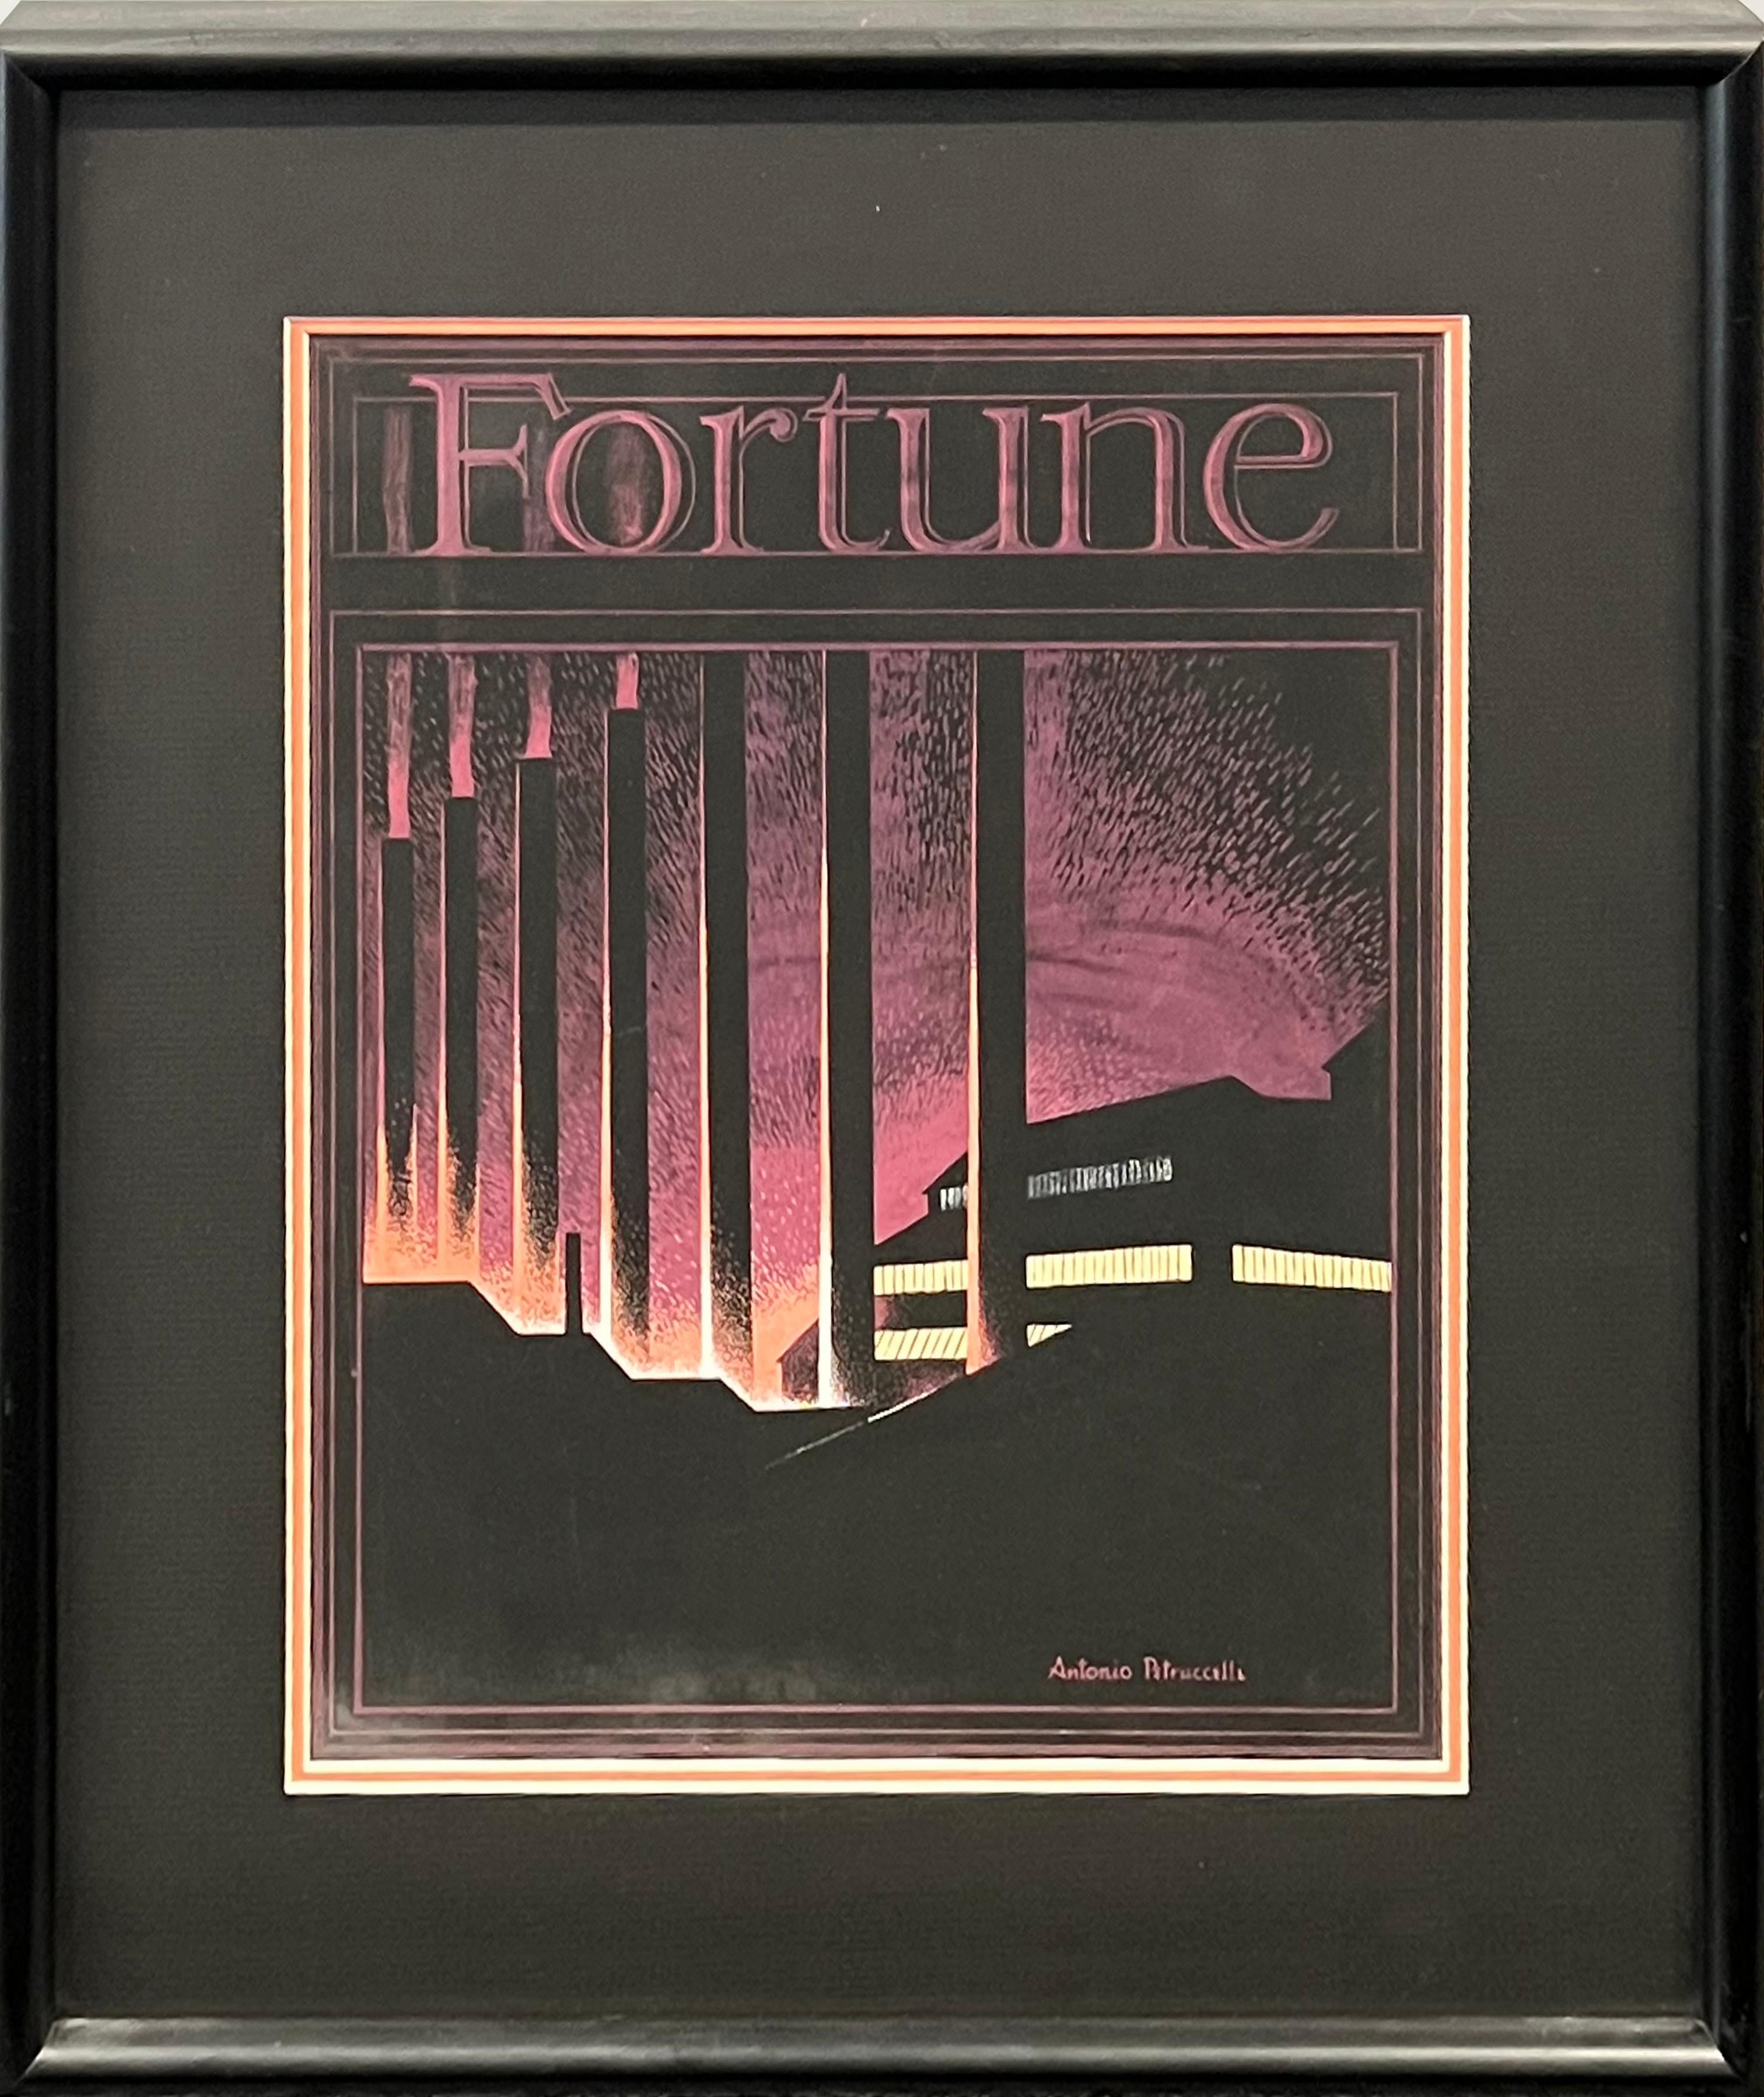 Original 1930s Painting Fortune Cover Proposal. Industrial Modern American Scene - Black Landscape Painting by Antonio Petruccelli